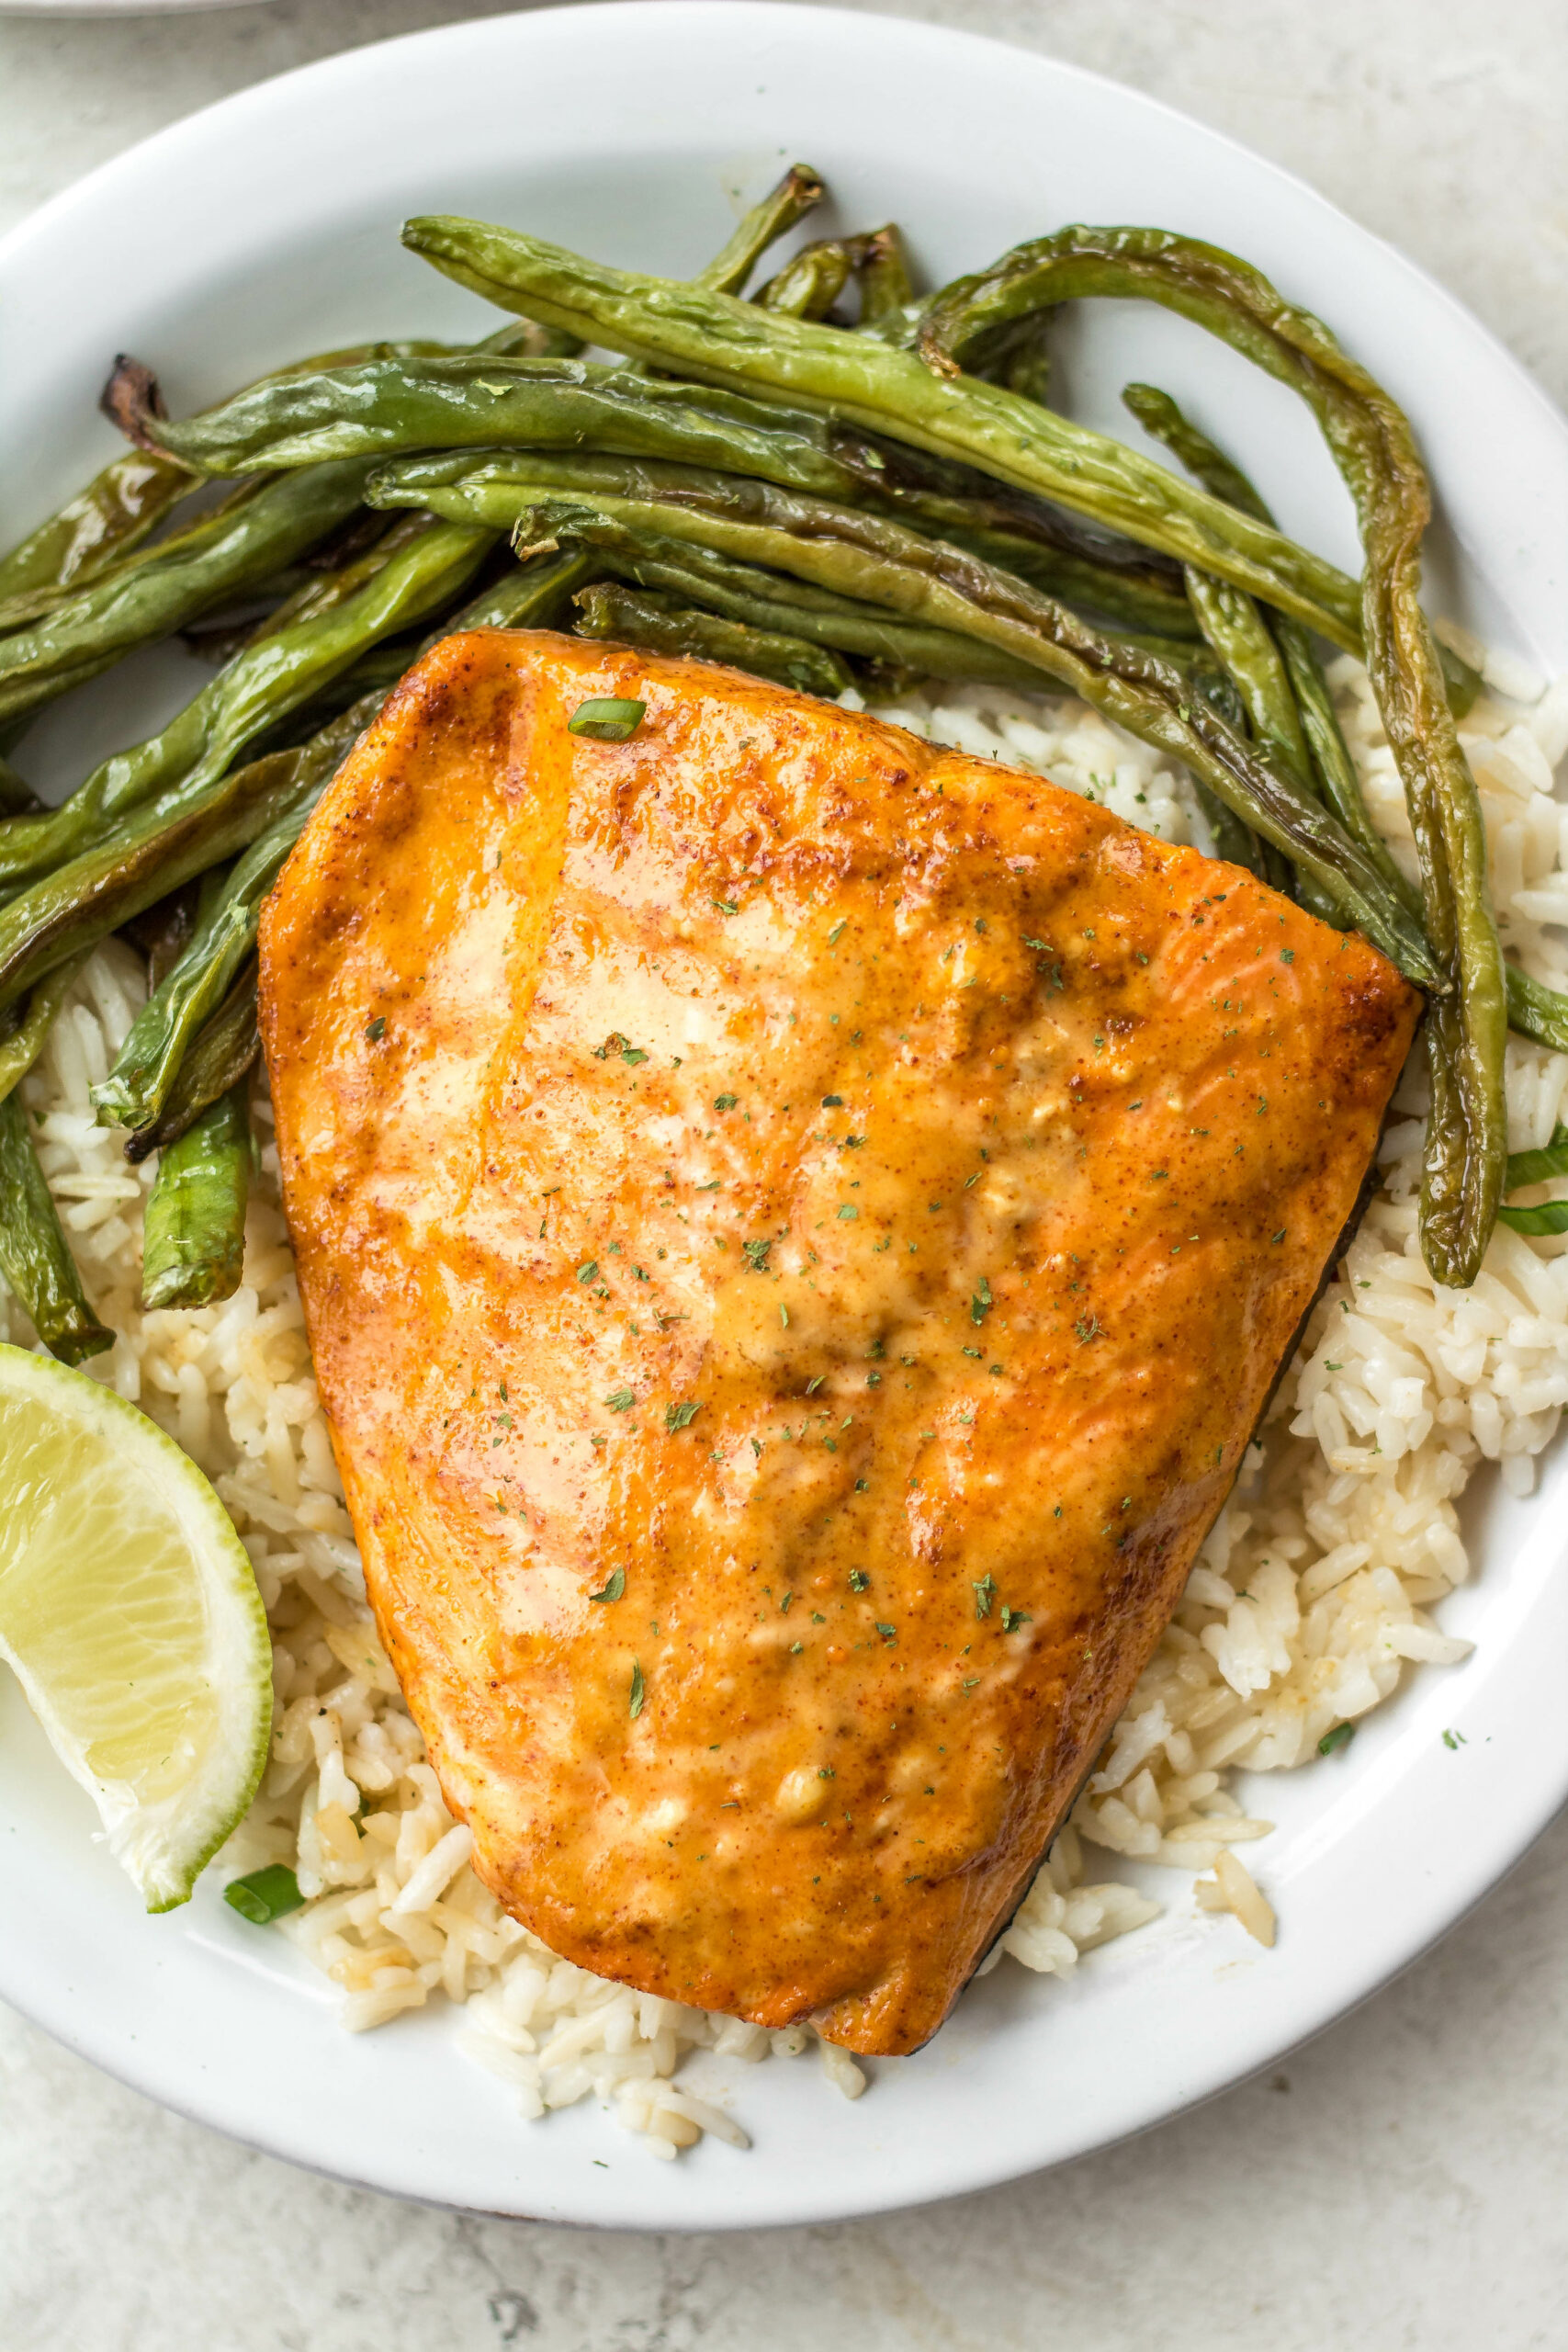 Bang Bang salmon with homemade Bang Bang sauce is both dairy free and gluten free. It takes about 10 minutes to cook and uses only a few easy ingredients. Made in the oven on a sheet pan, it's a breeze for cleanup and makes for an easy win for meal prep or dinner anytime. #homemadebangbangsauce #glutenfreesalmon #diaryfreesalmon #salmonrecipes #10minutemeals #bangbangsalmon